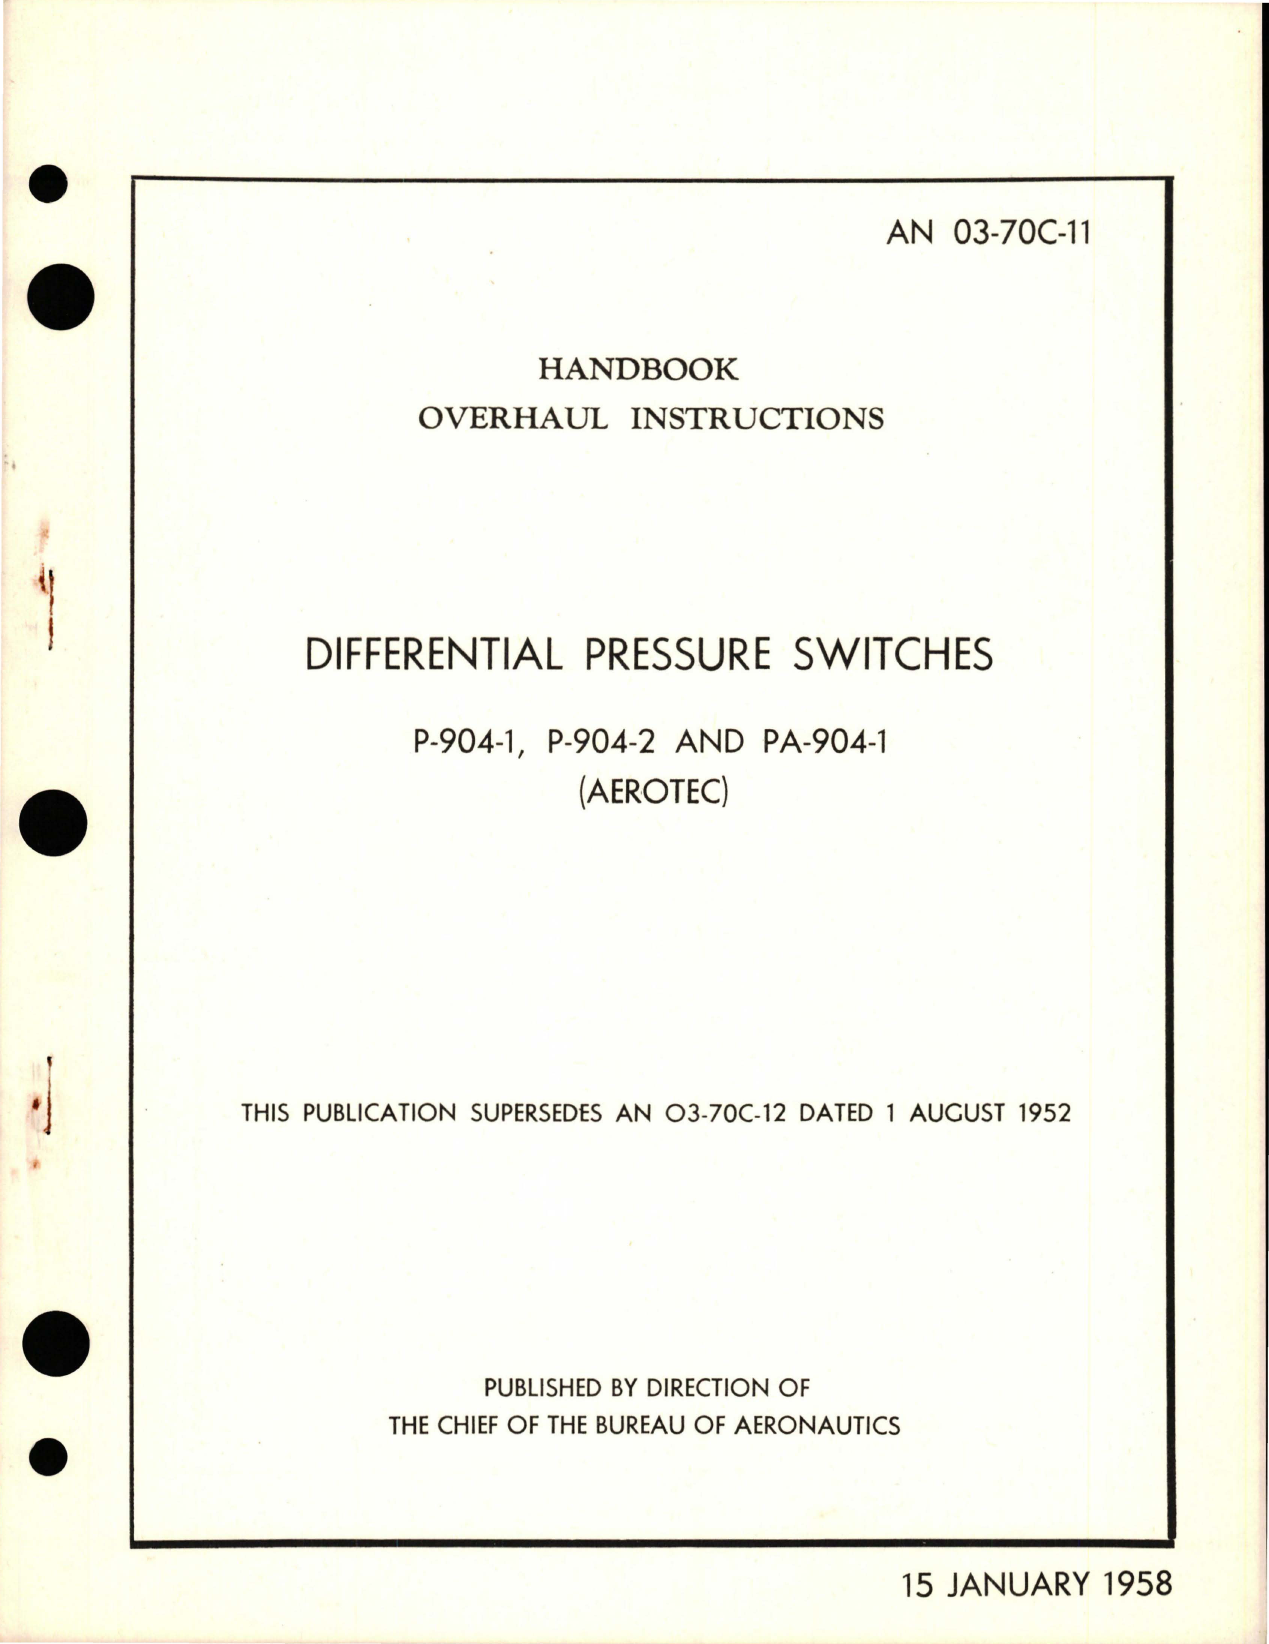 Sample page 1 from AirCorps Library document: Overhaul Instructions for Differential Pressure Switches - P-904-1, P-904-2, and PA-904-1